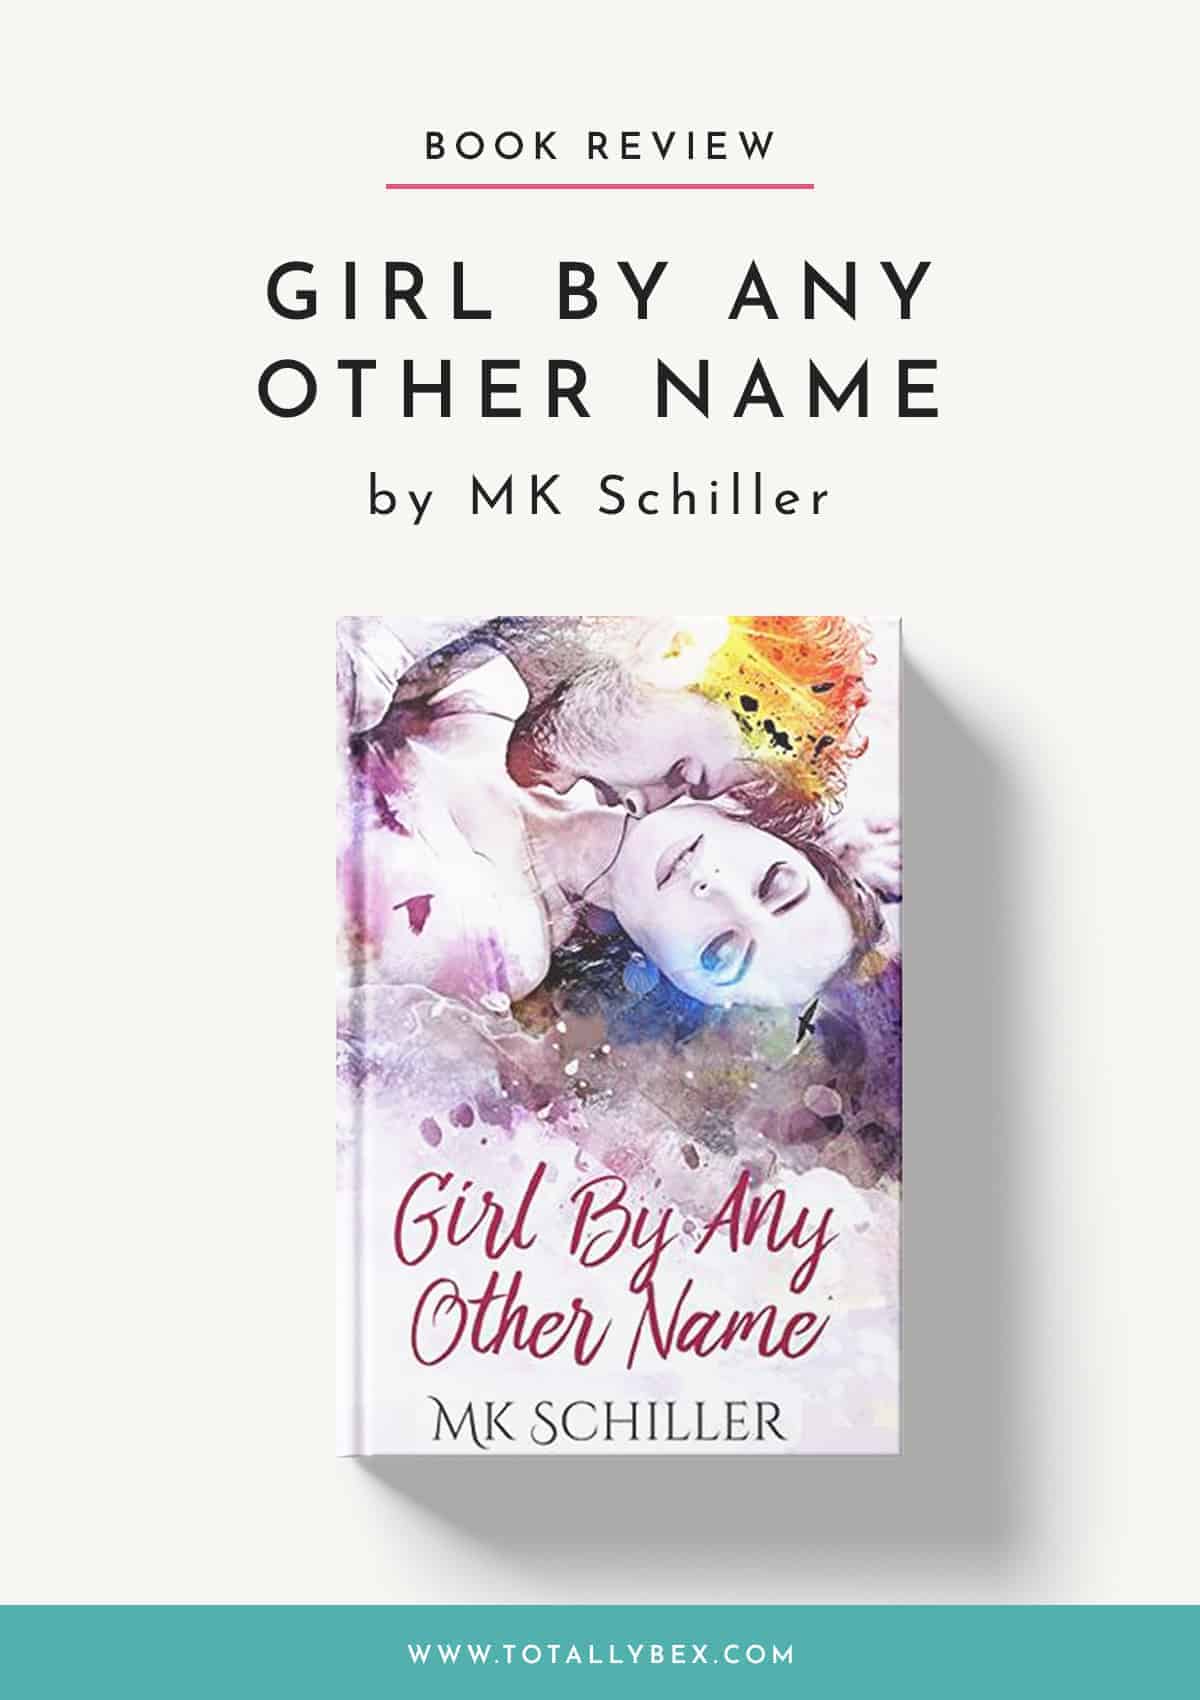 Girl By Any Other Name by MK Schiller – Unexpected and Suspenseful!